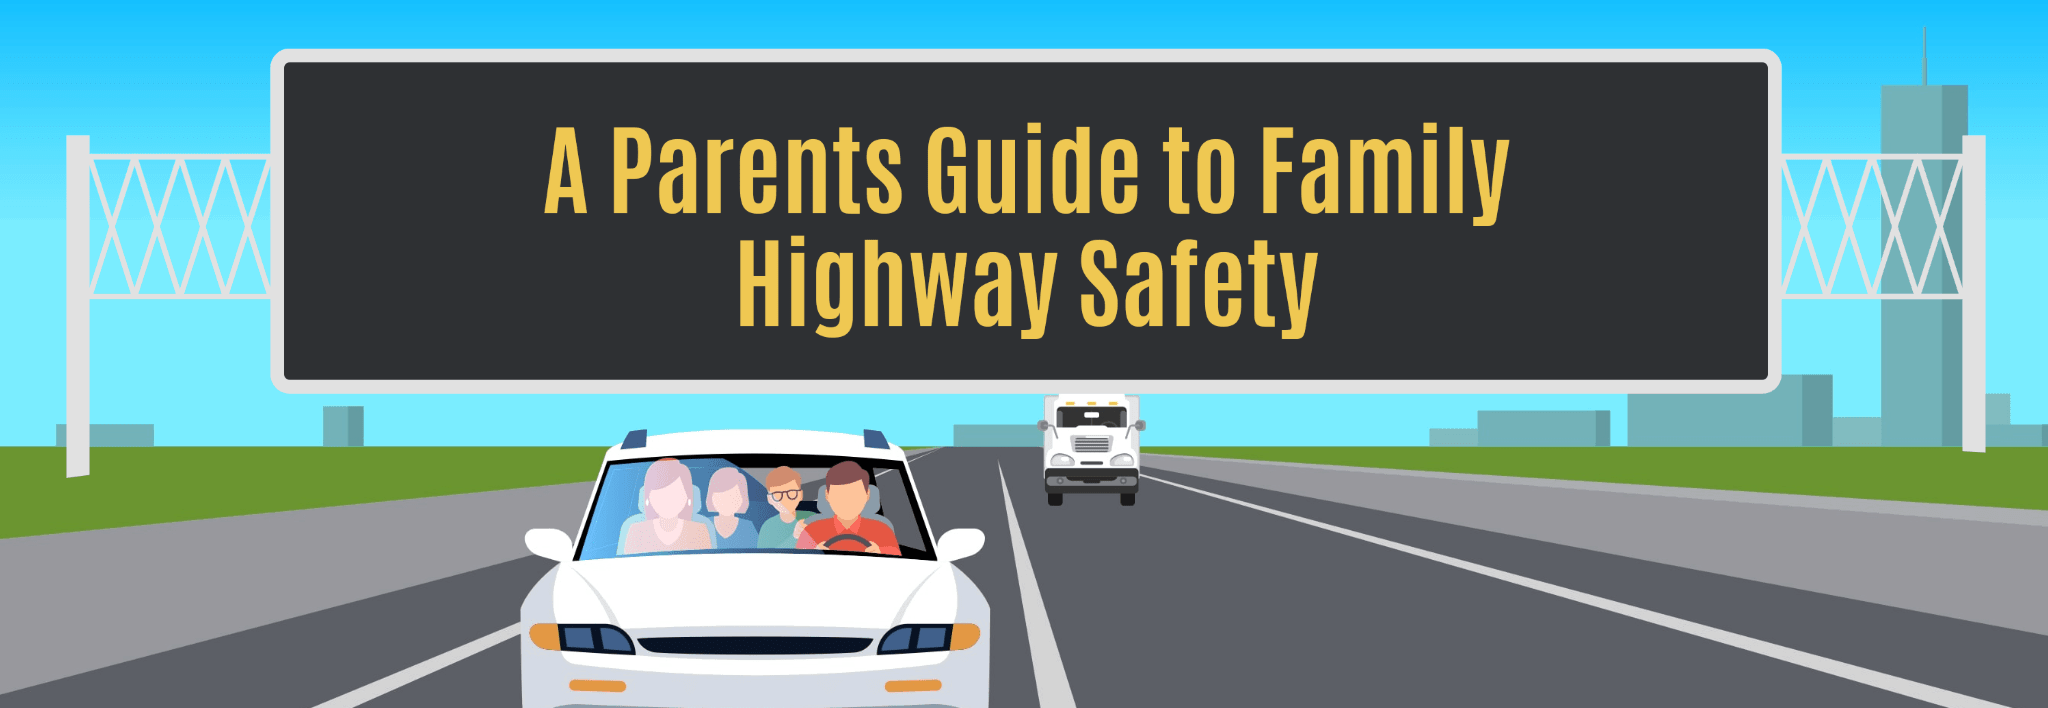 A Parents Guide to Family Highway Safety Featured Image